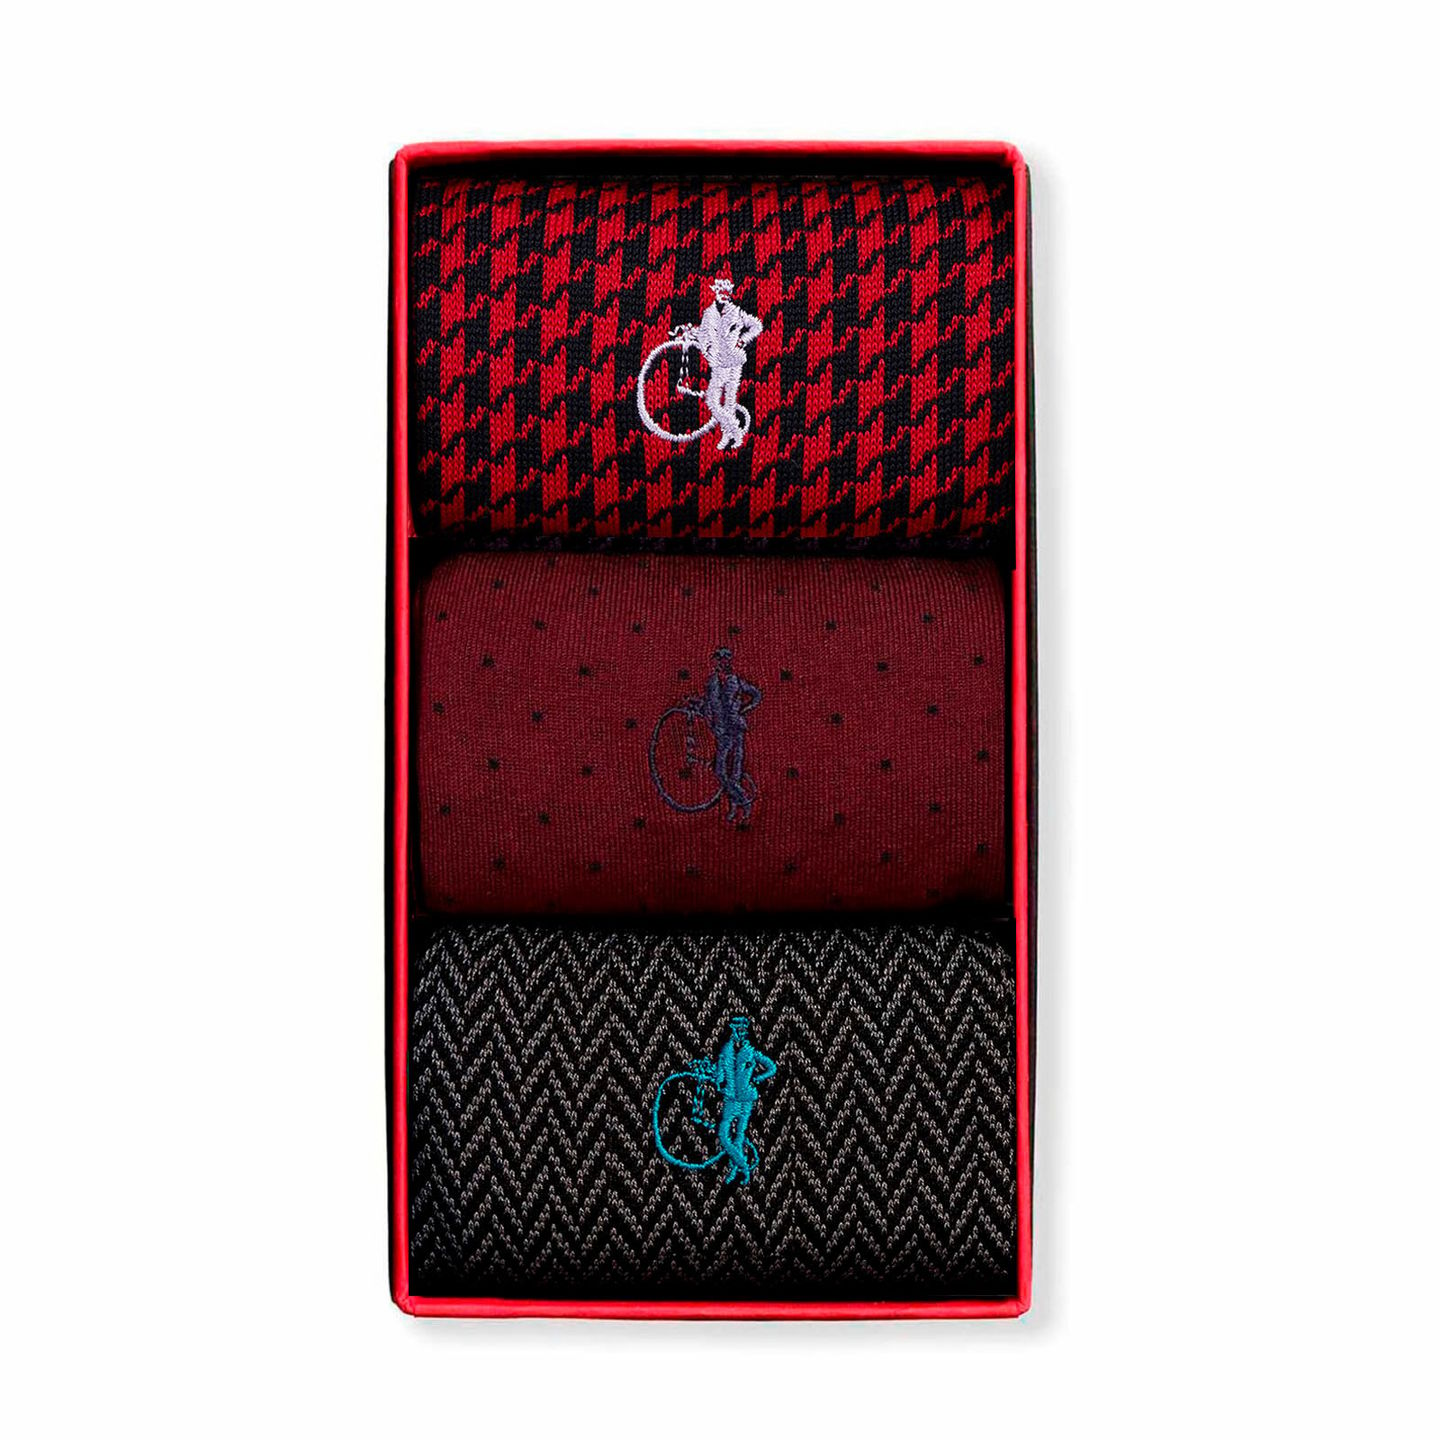 3 Pair Windsor collection featuring red and black chequered socks and dark red polka dot